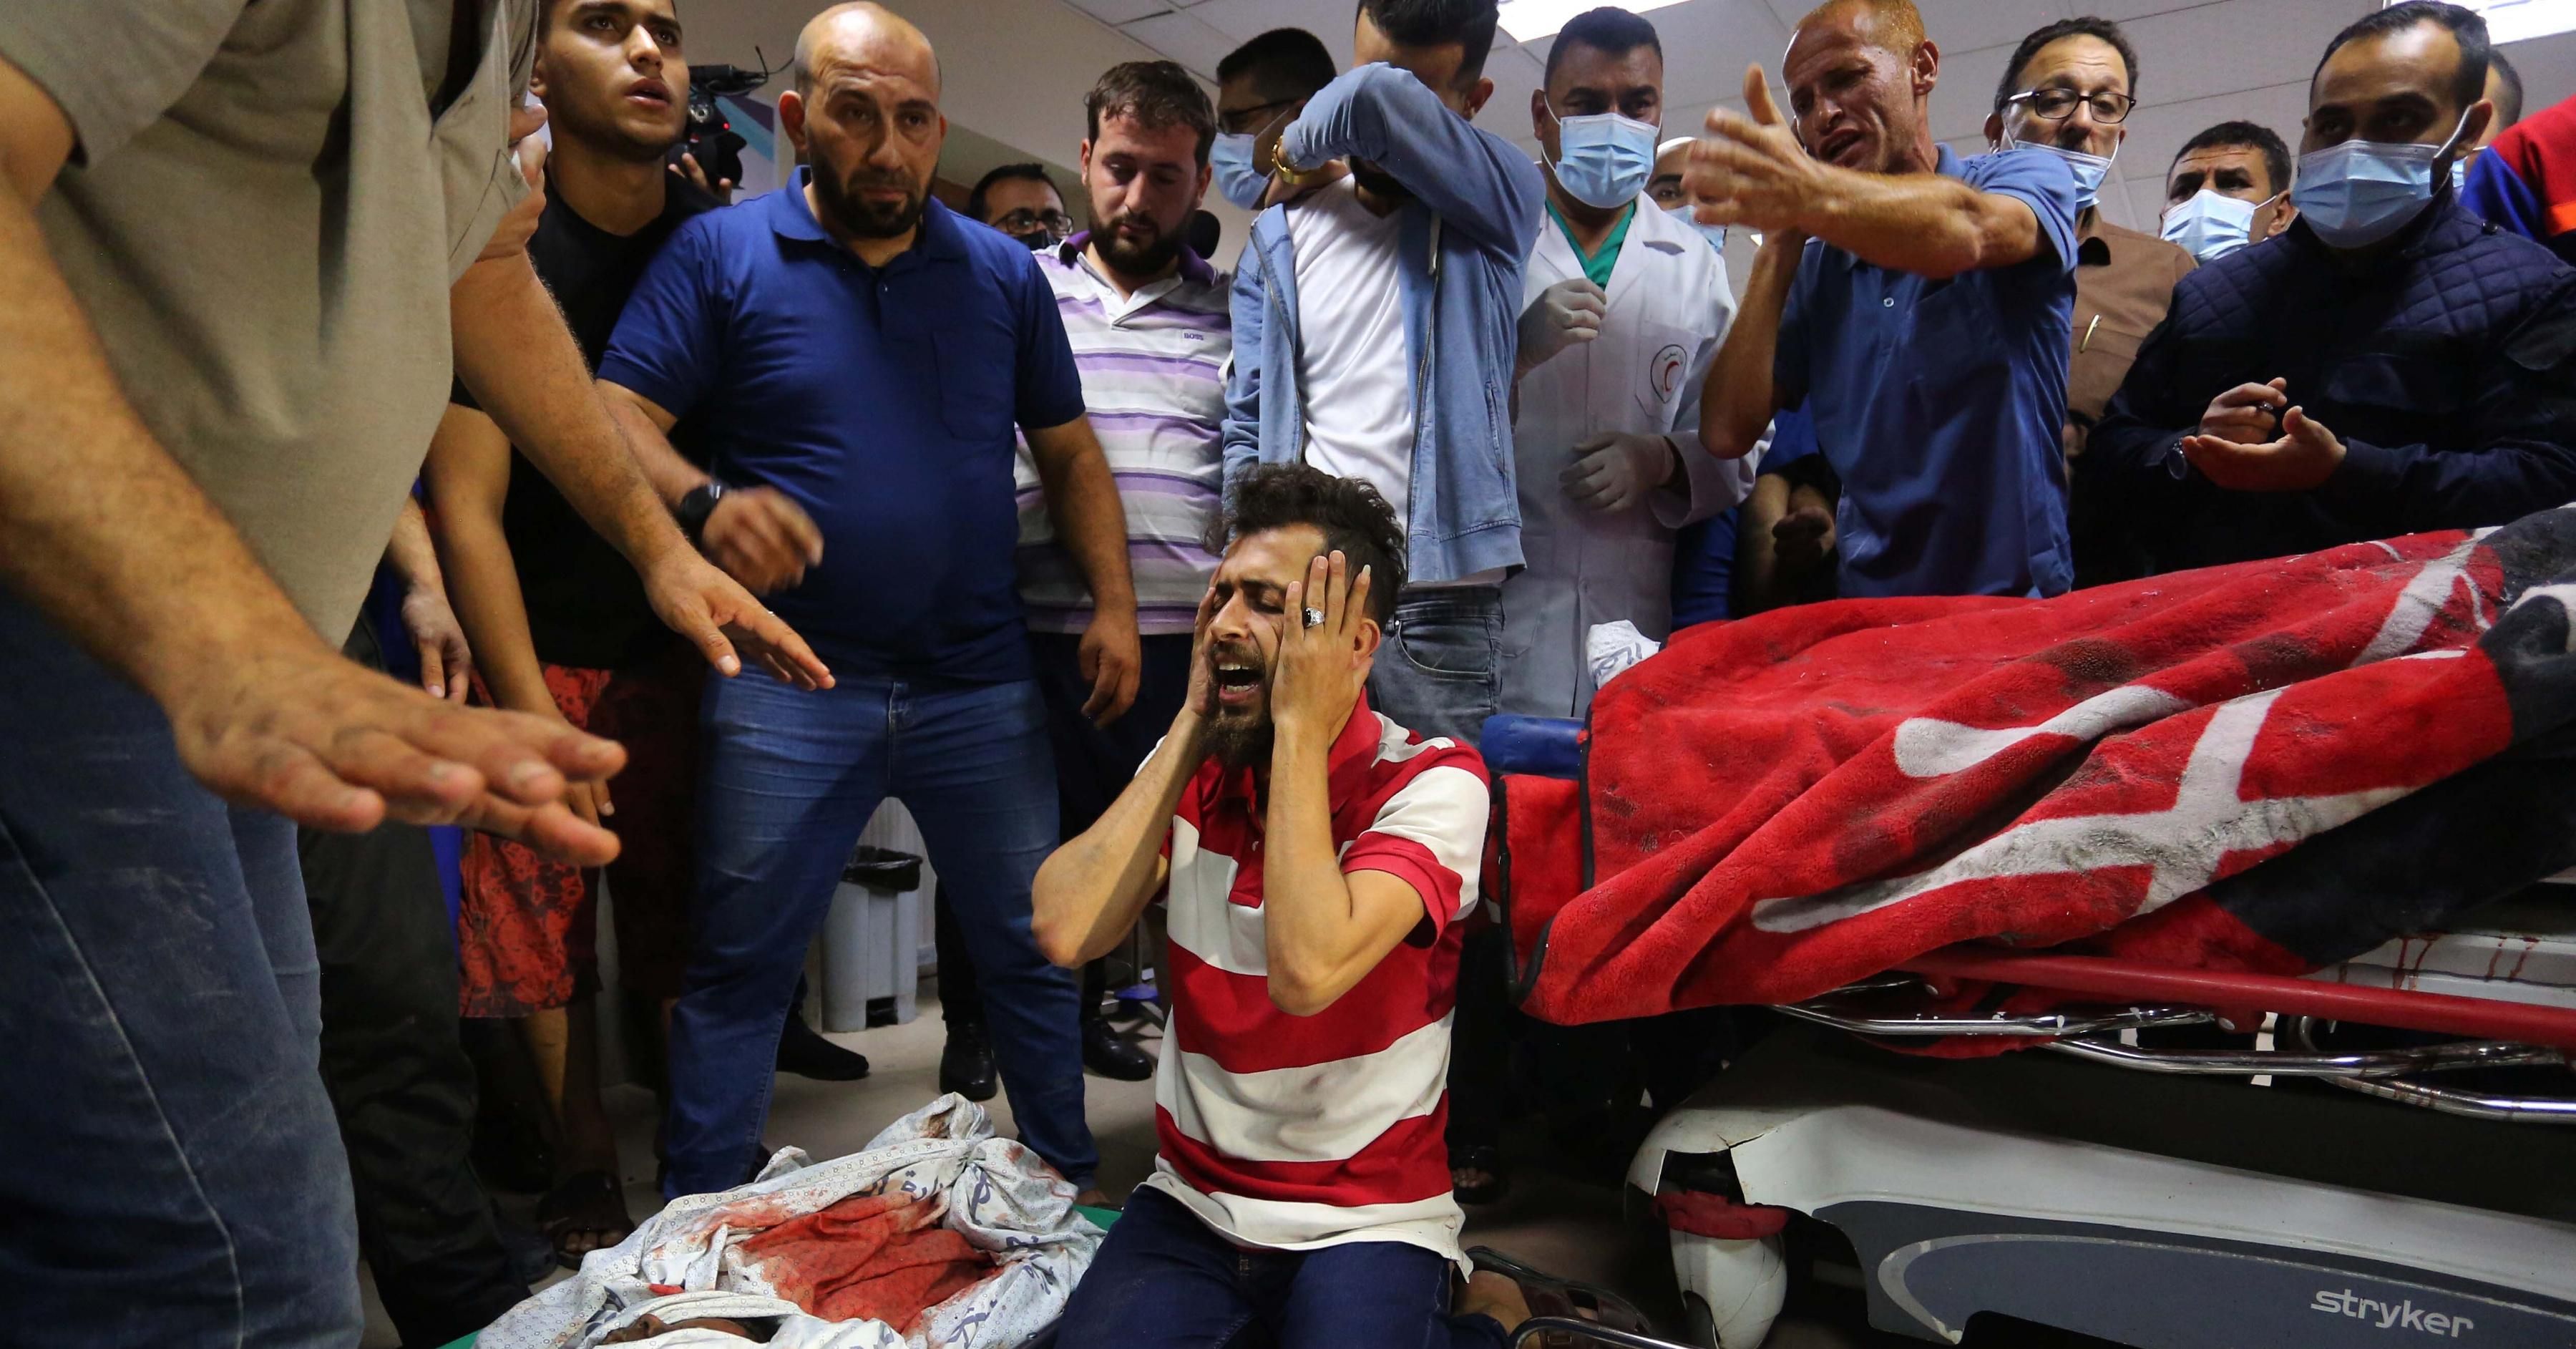 (EDITOR'S NOTE: Image depicts death) Relatives mourn next to the bodies who were killed in Israeli attack carried out to home of Palestinian Abu Khatab Family living in Al-Shati Camp in Gaza Strip, at the morgue of Shifa Hospital on May 15, 2021, in Gaza City, Gaza. 7 people, including 5 children, 2 women killed in Israeli attack on Gaza Strip. (Photo: Ashraf Amra/Anadolu Agency via Getty Images)